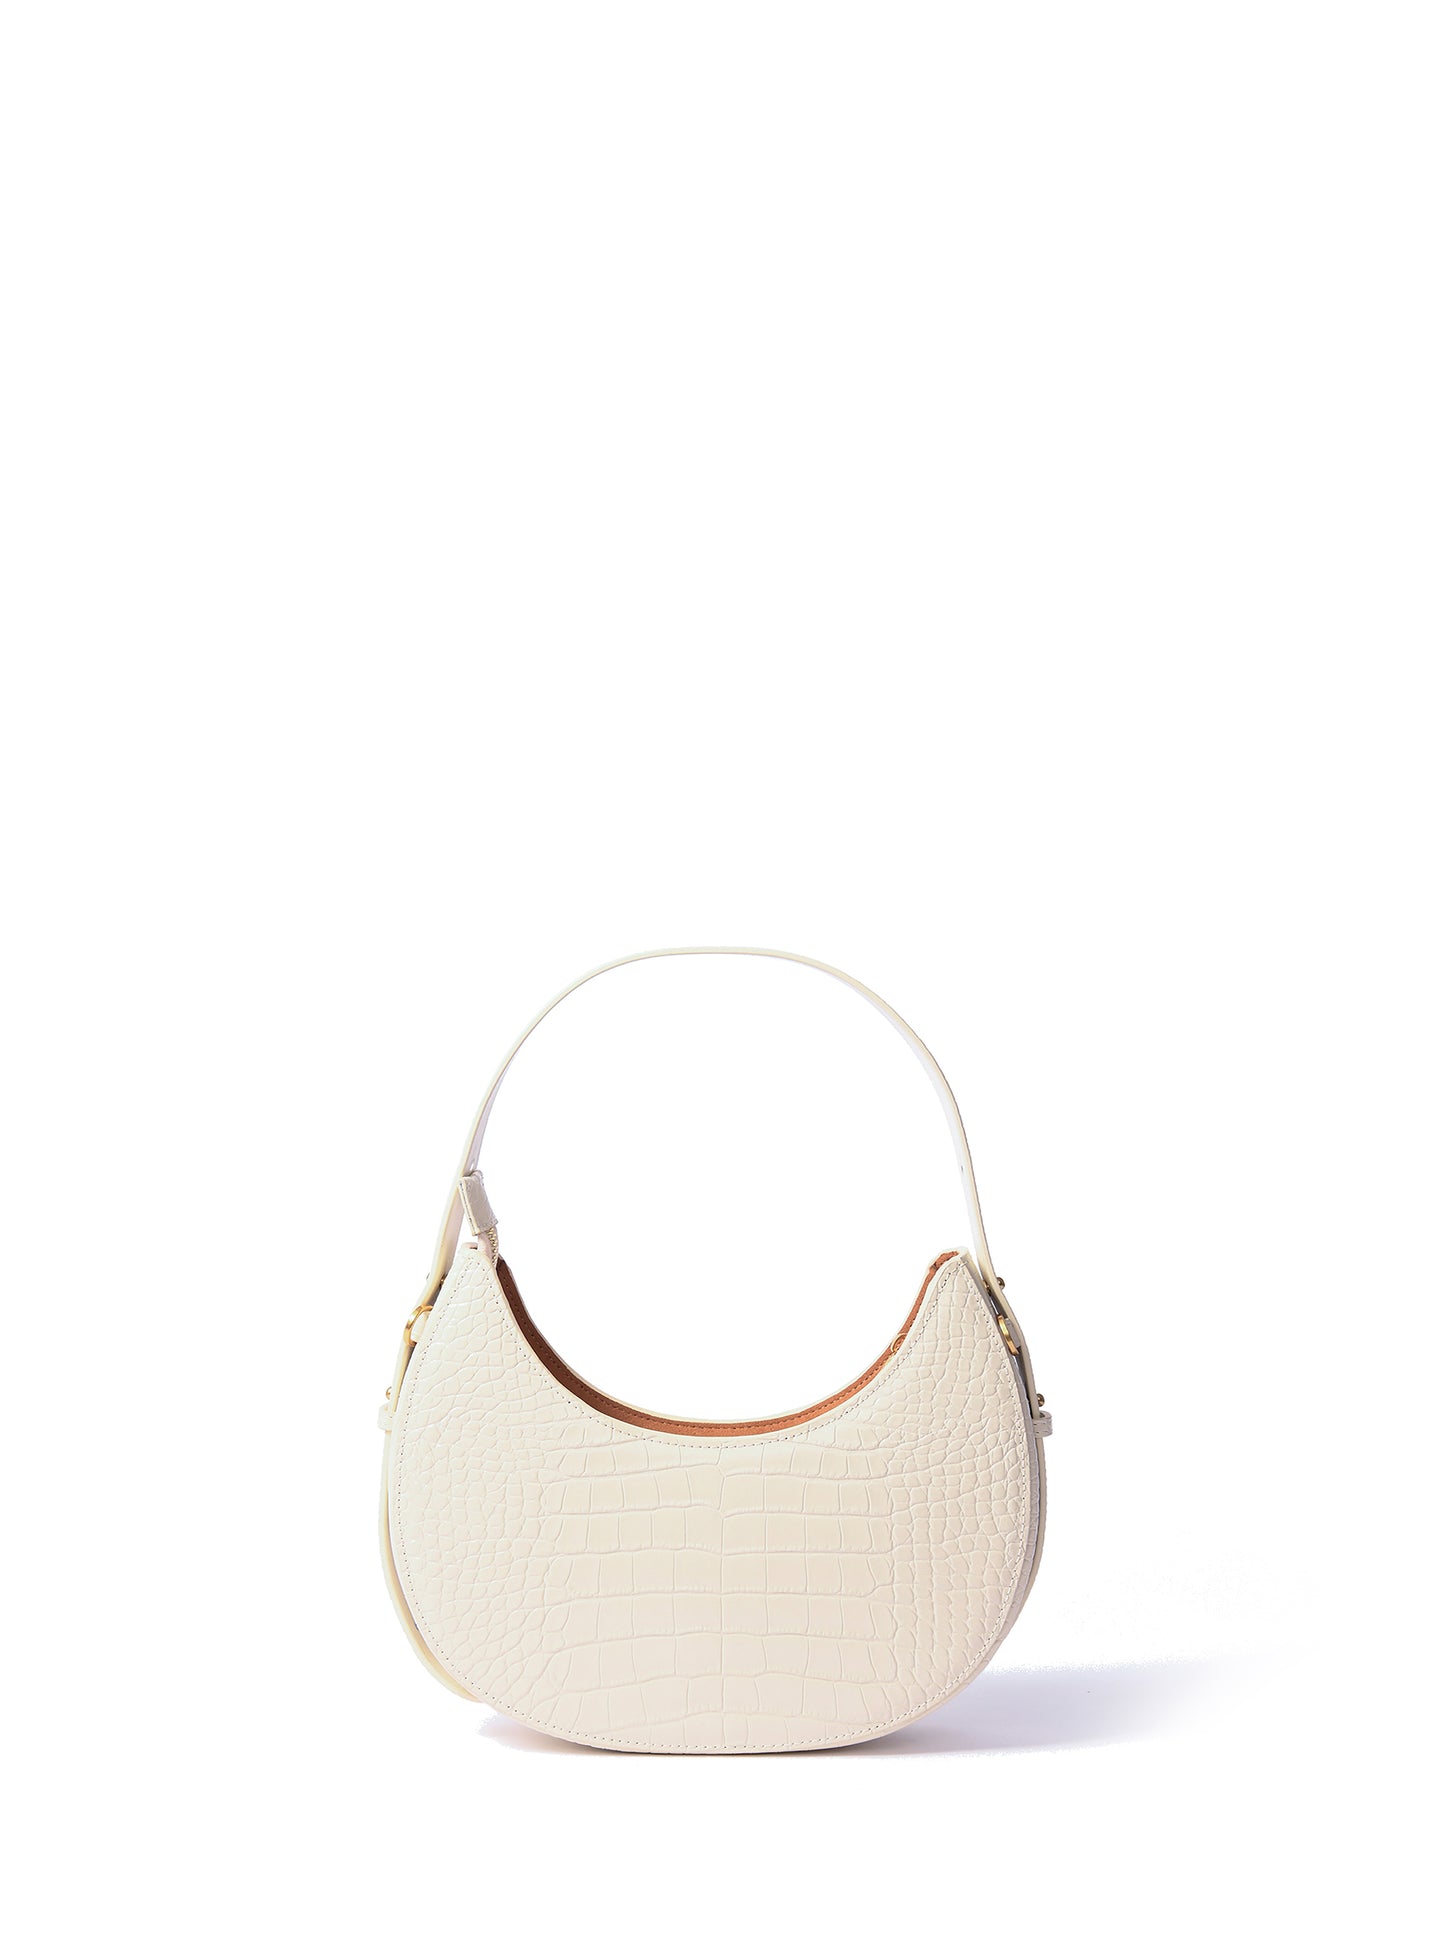 Naomi Leather Moon Bag with Croc-Embossed Pattern, White